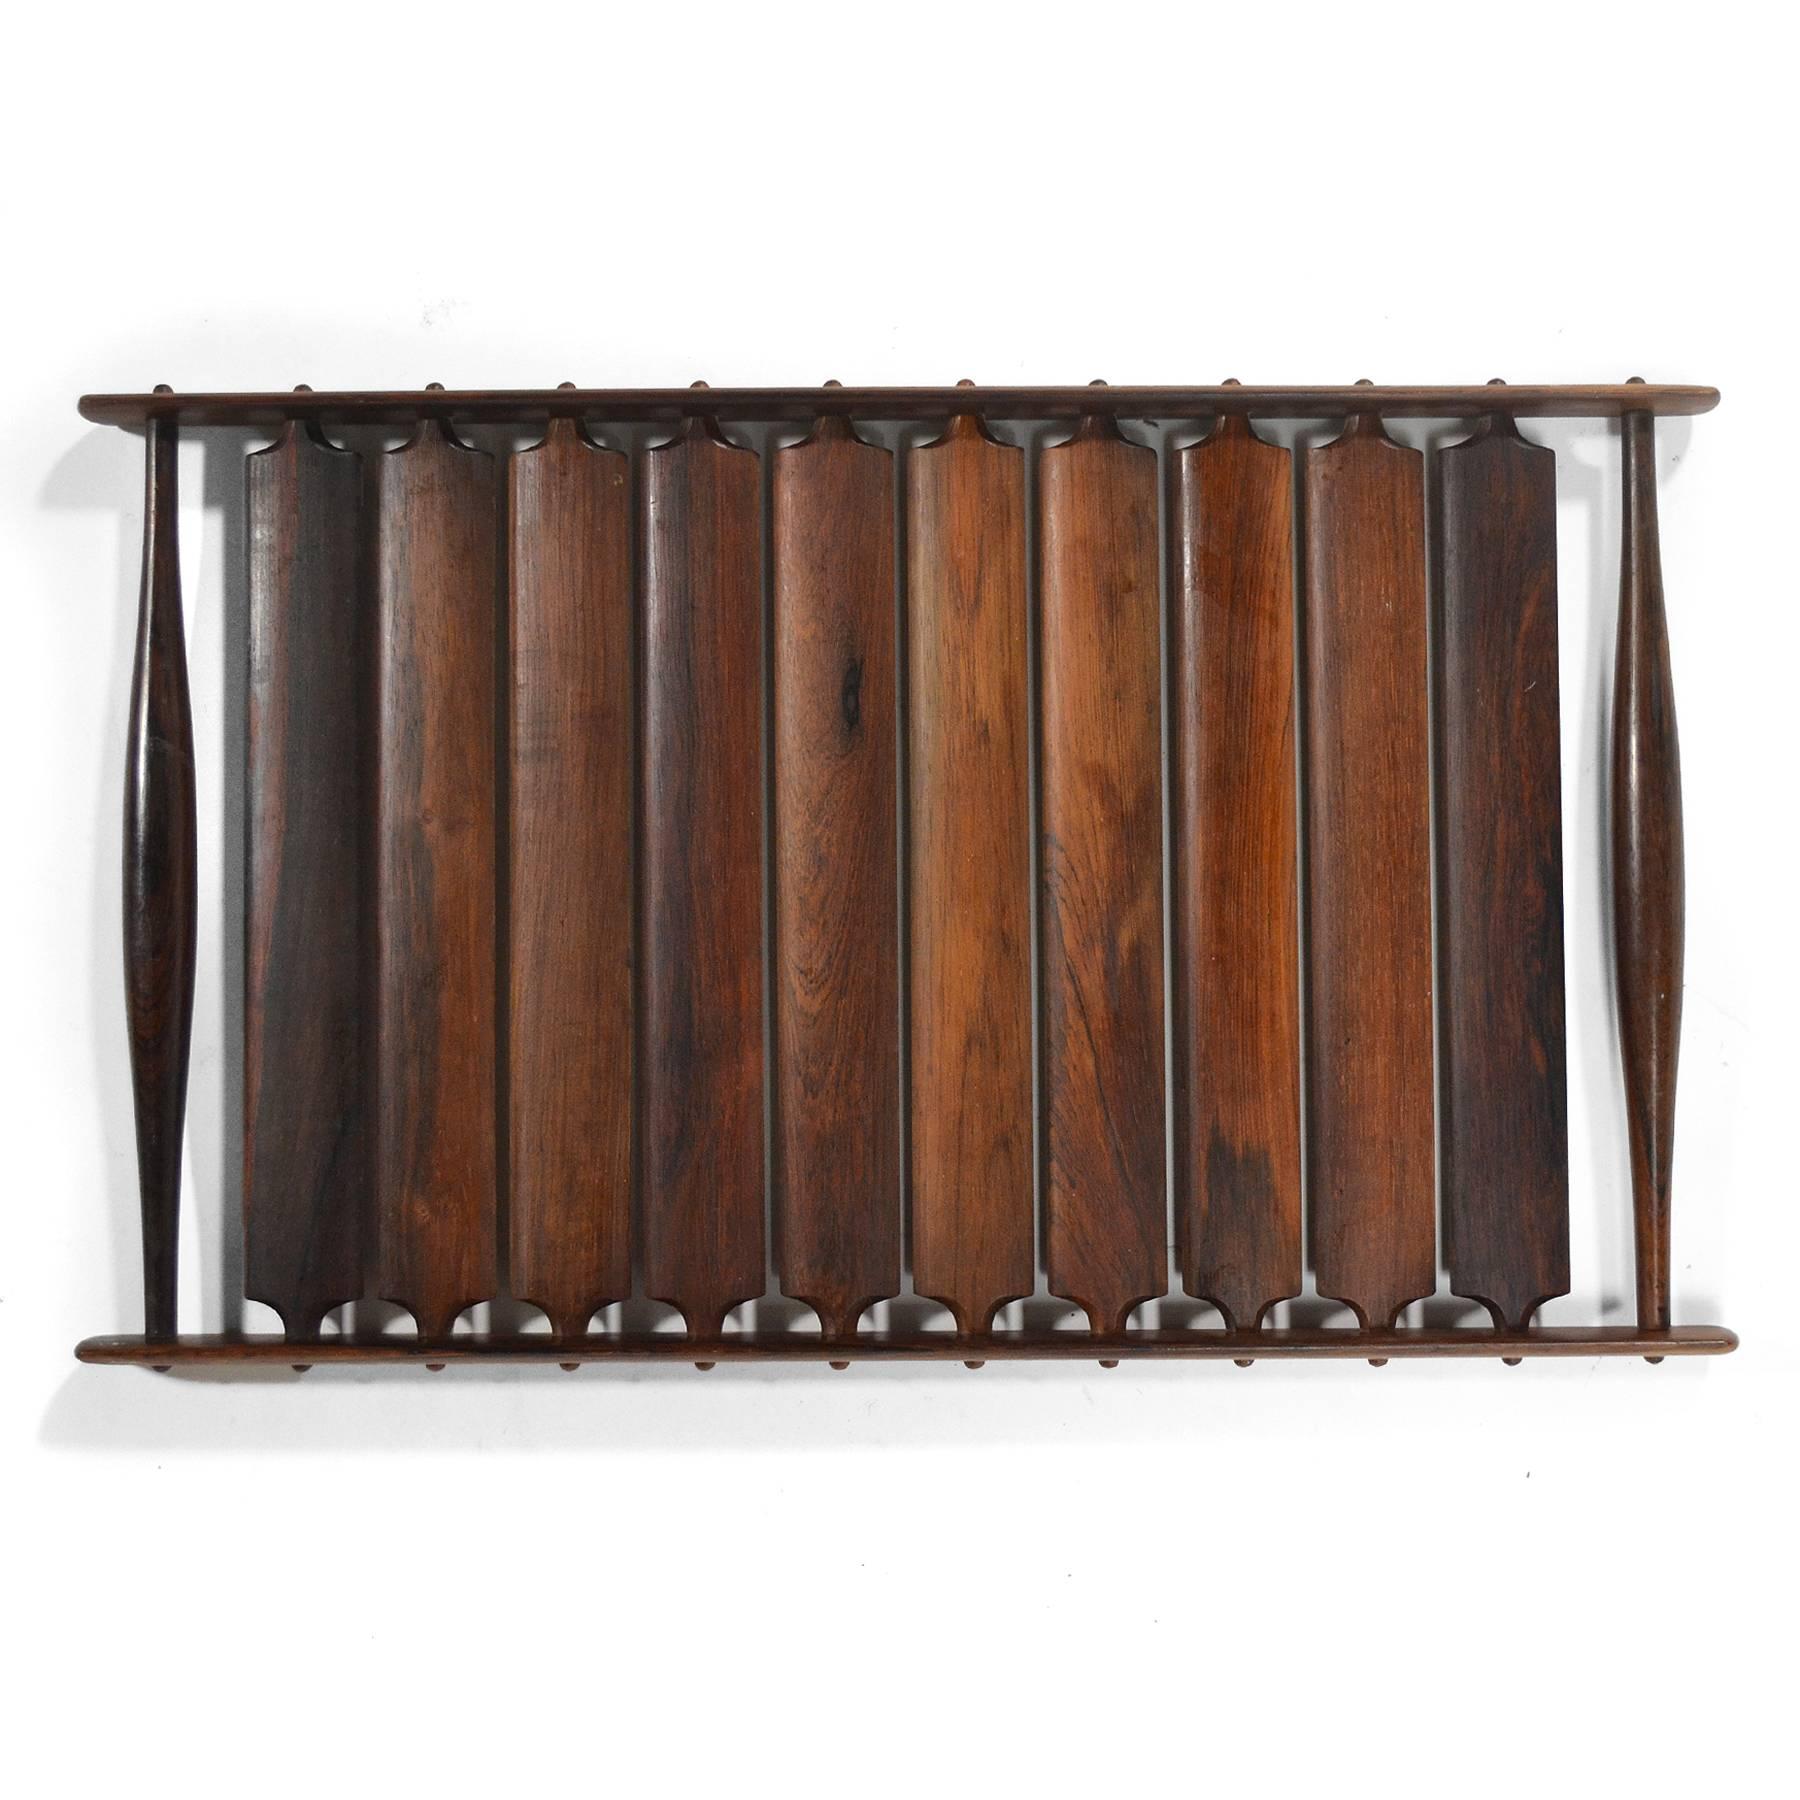 This striking slatted tray by Jens Quistgaard is from Dansk's 